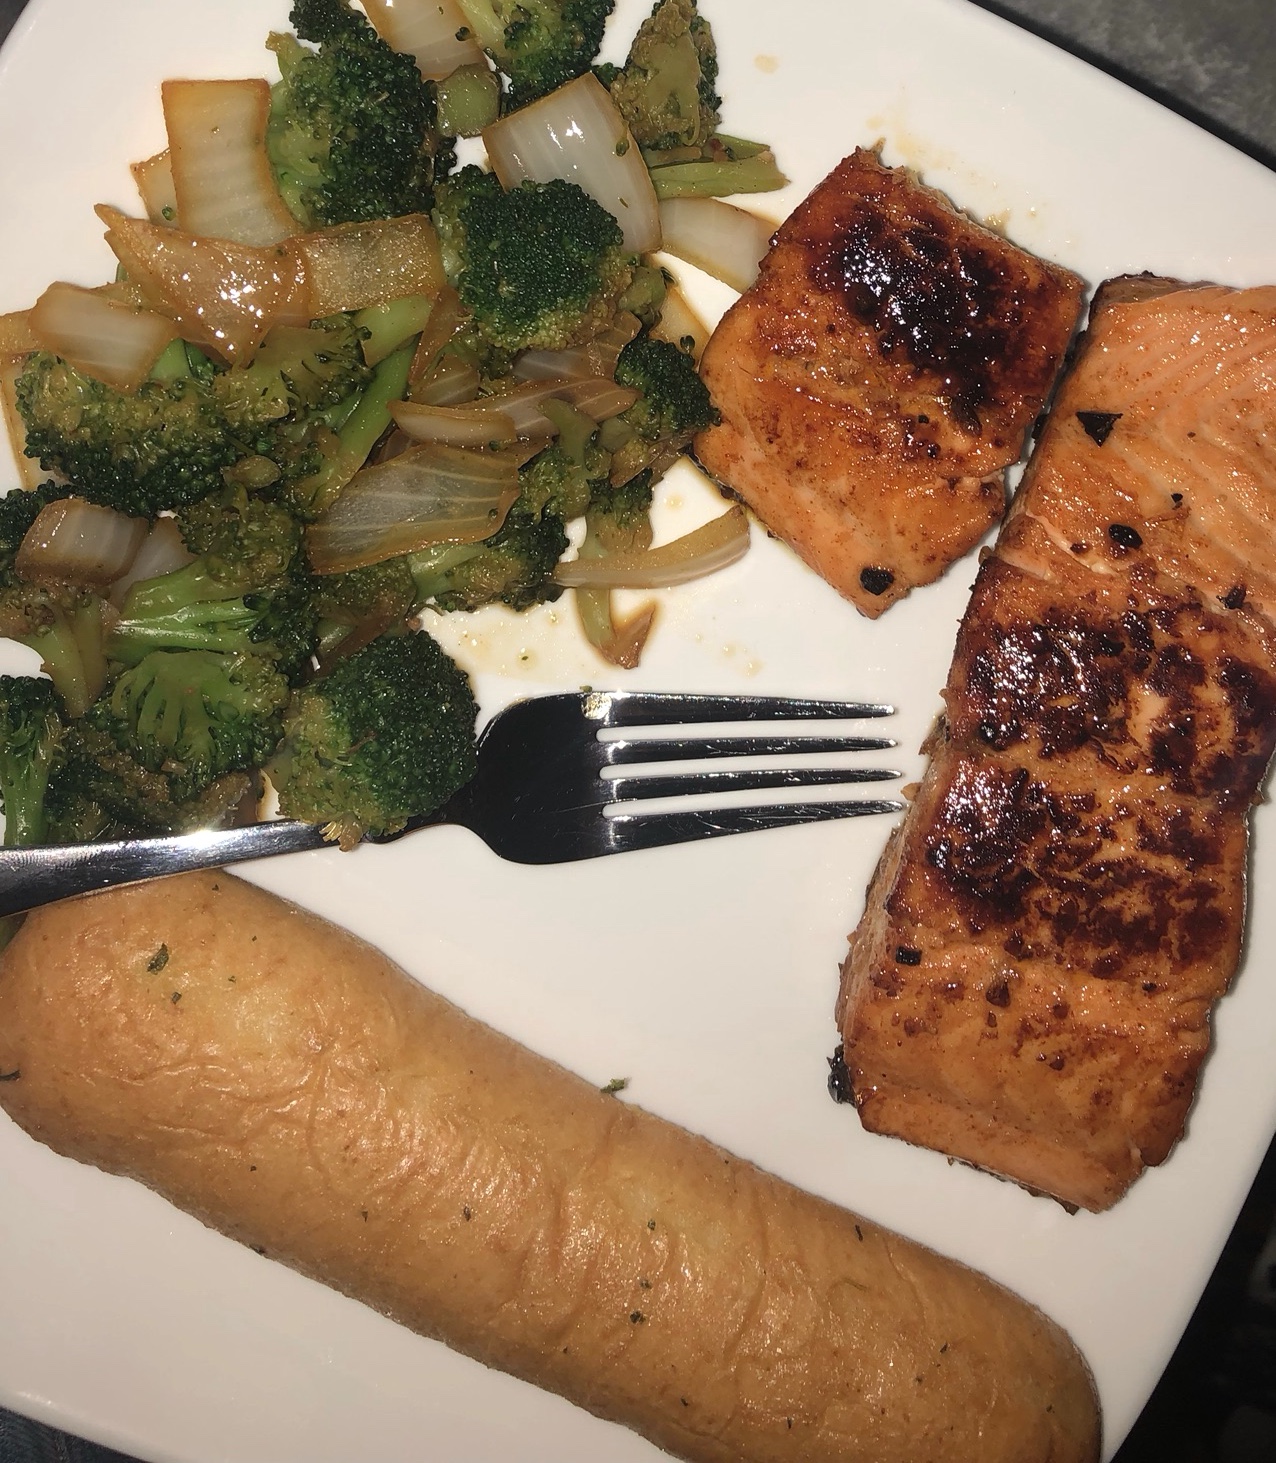 A white plate with salmon, broccoli and garlic bread.